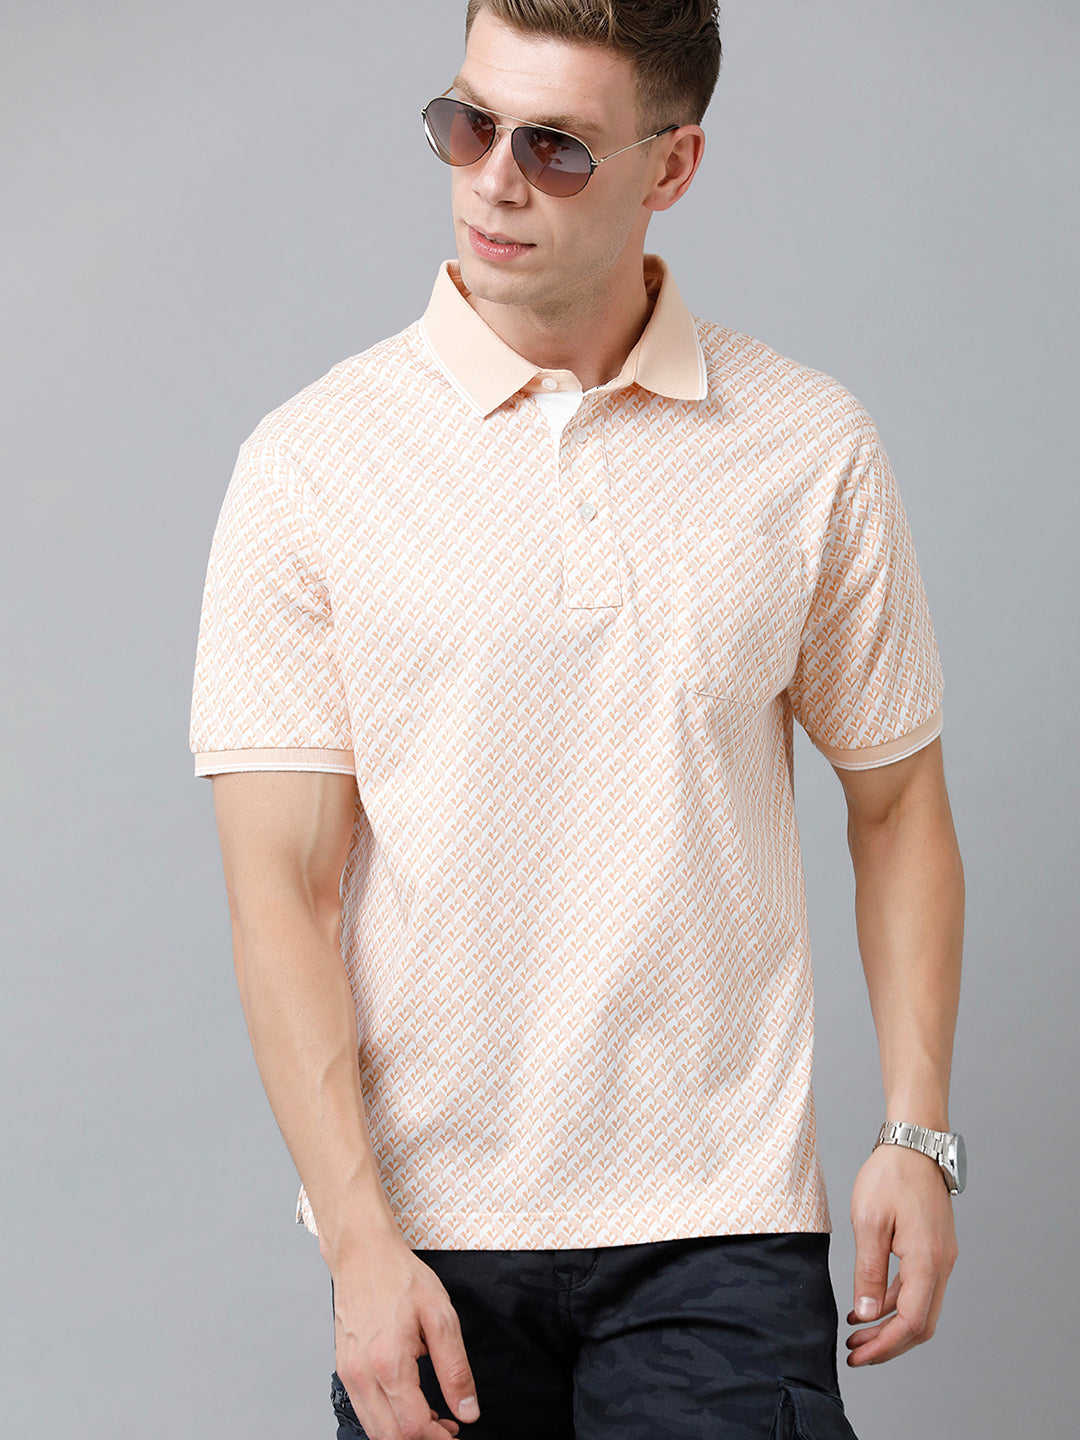 Classic Polo Men's Cotton Half Sleeve Printed Authentic Fit Polo Neck Peach Color T-Shirt | Carve Polo - 09 A